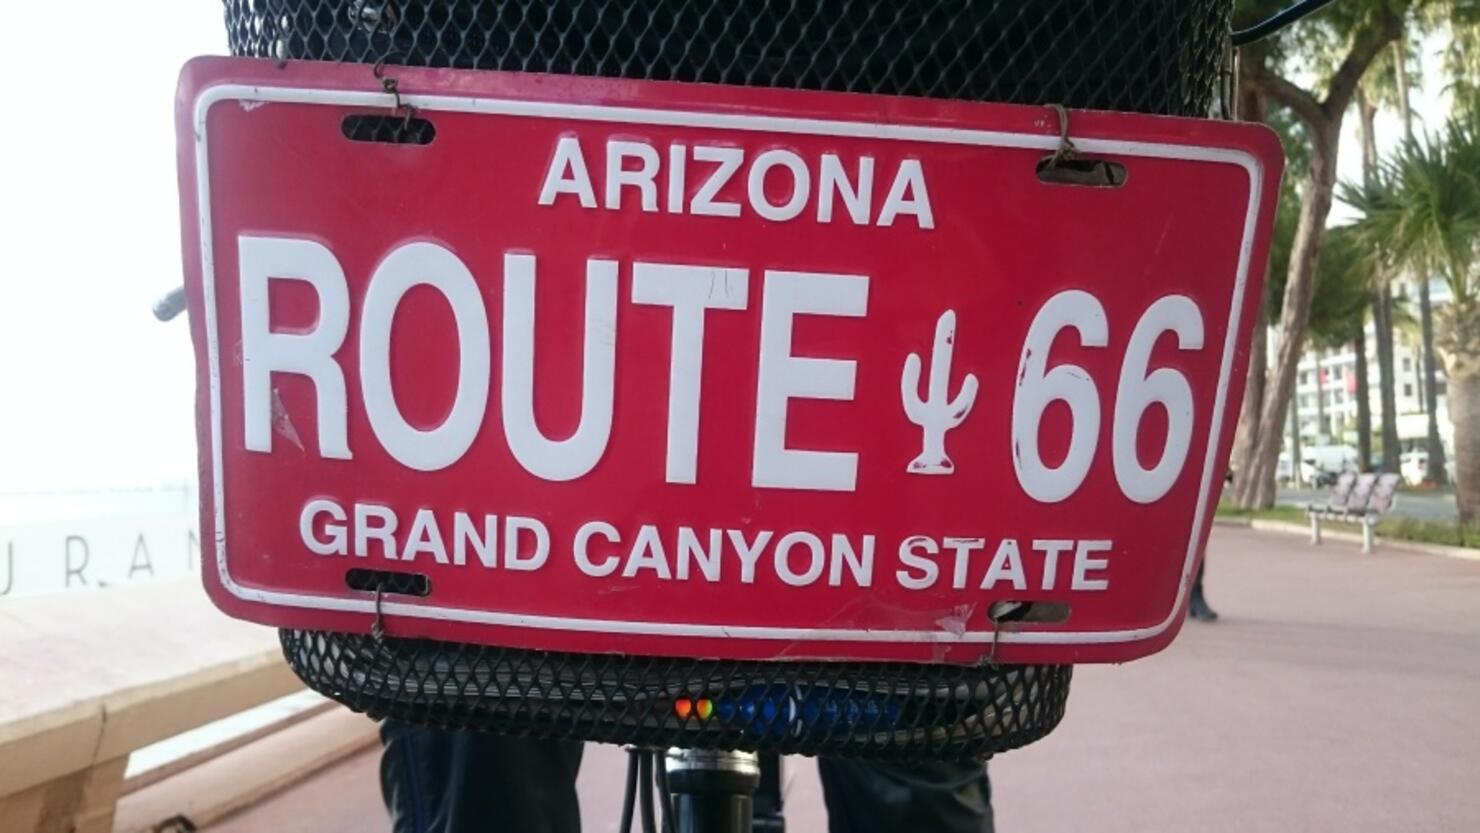 personalized-license-plates-causing-controversy-in-arizona-iheart